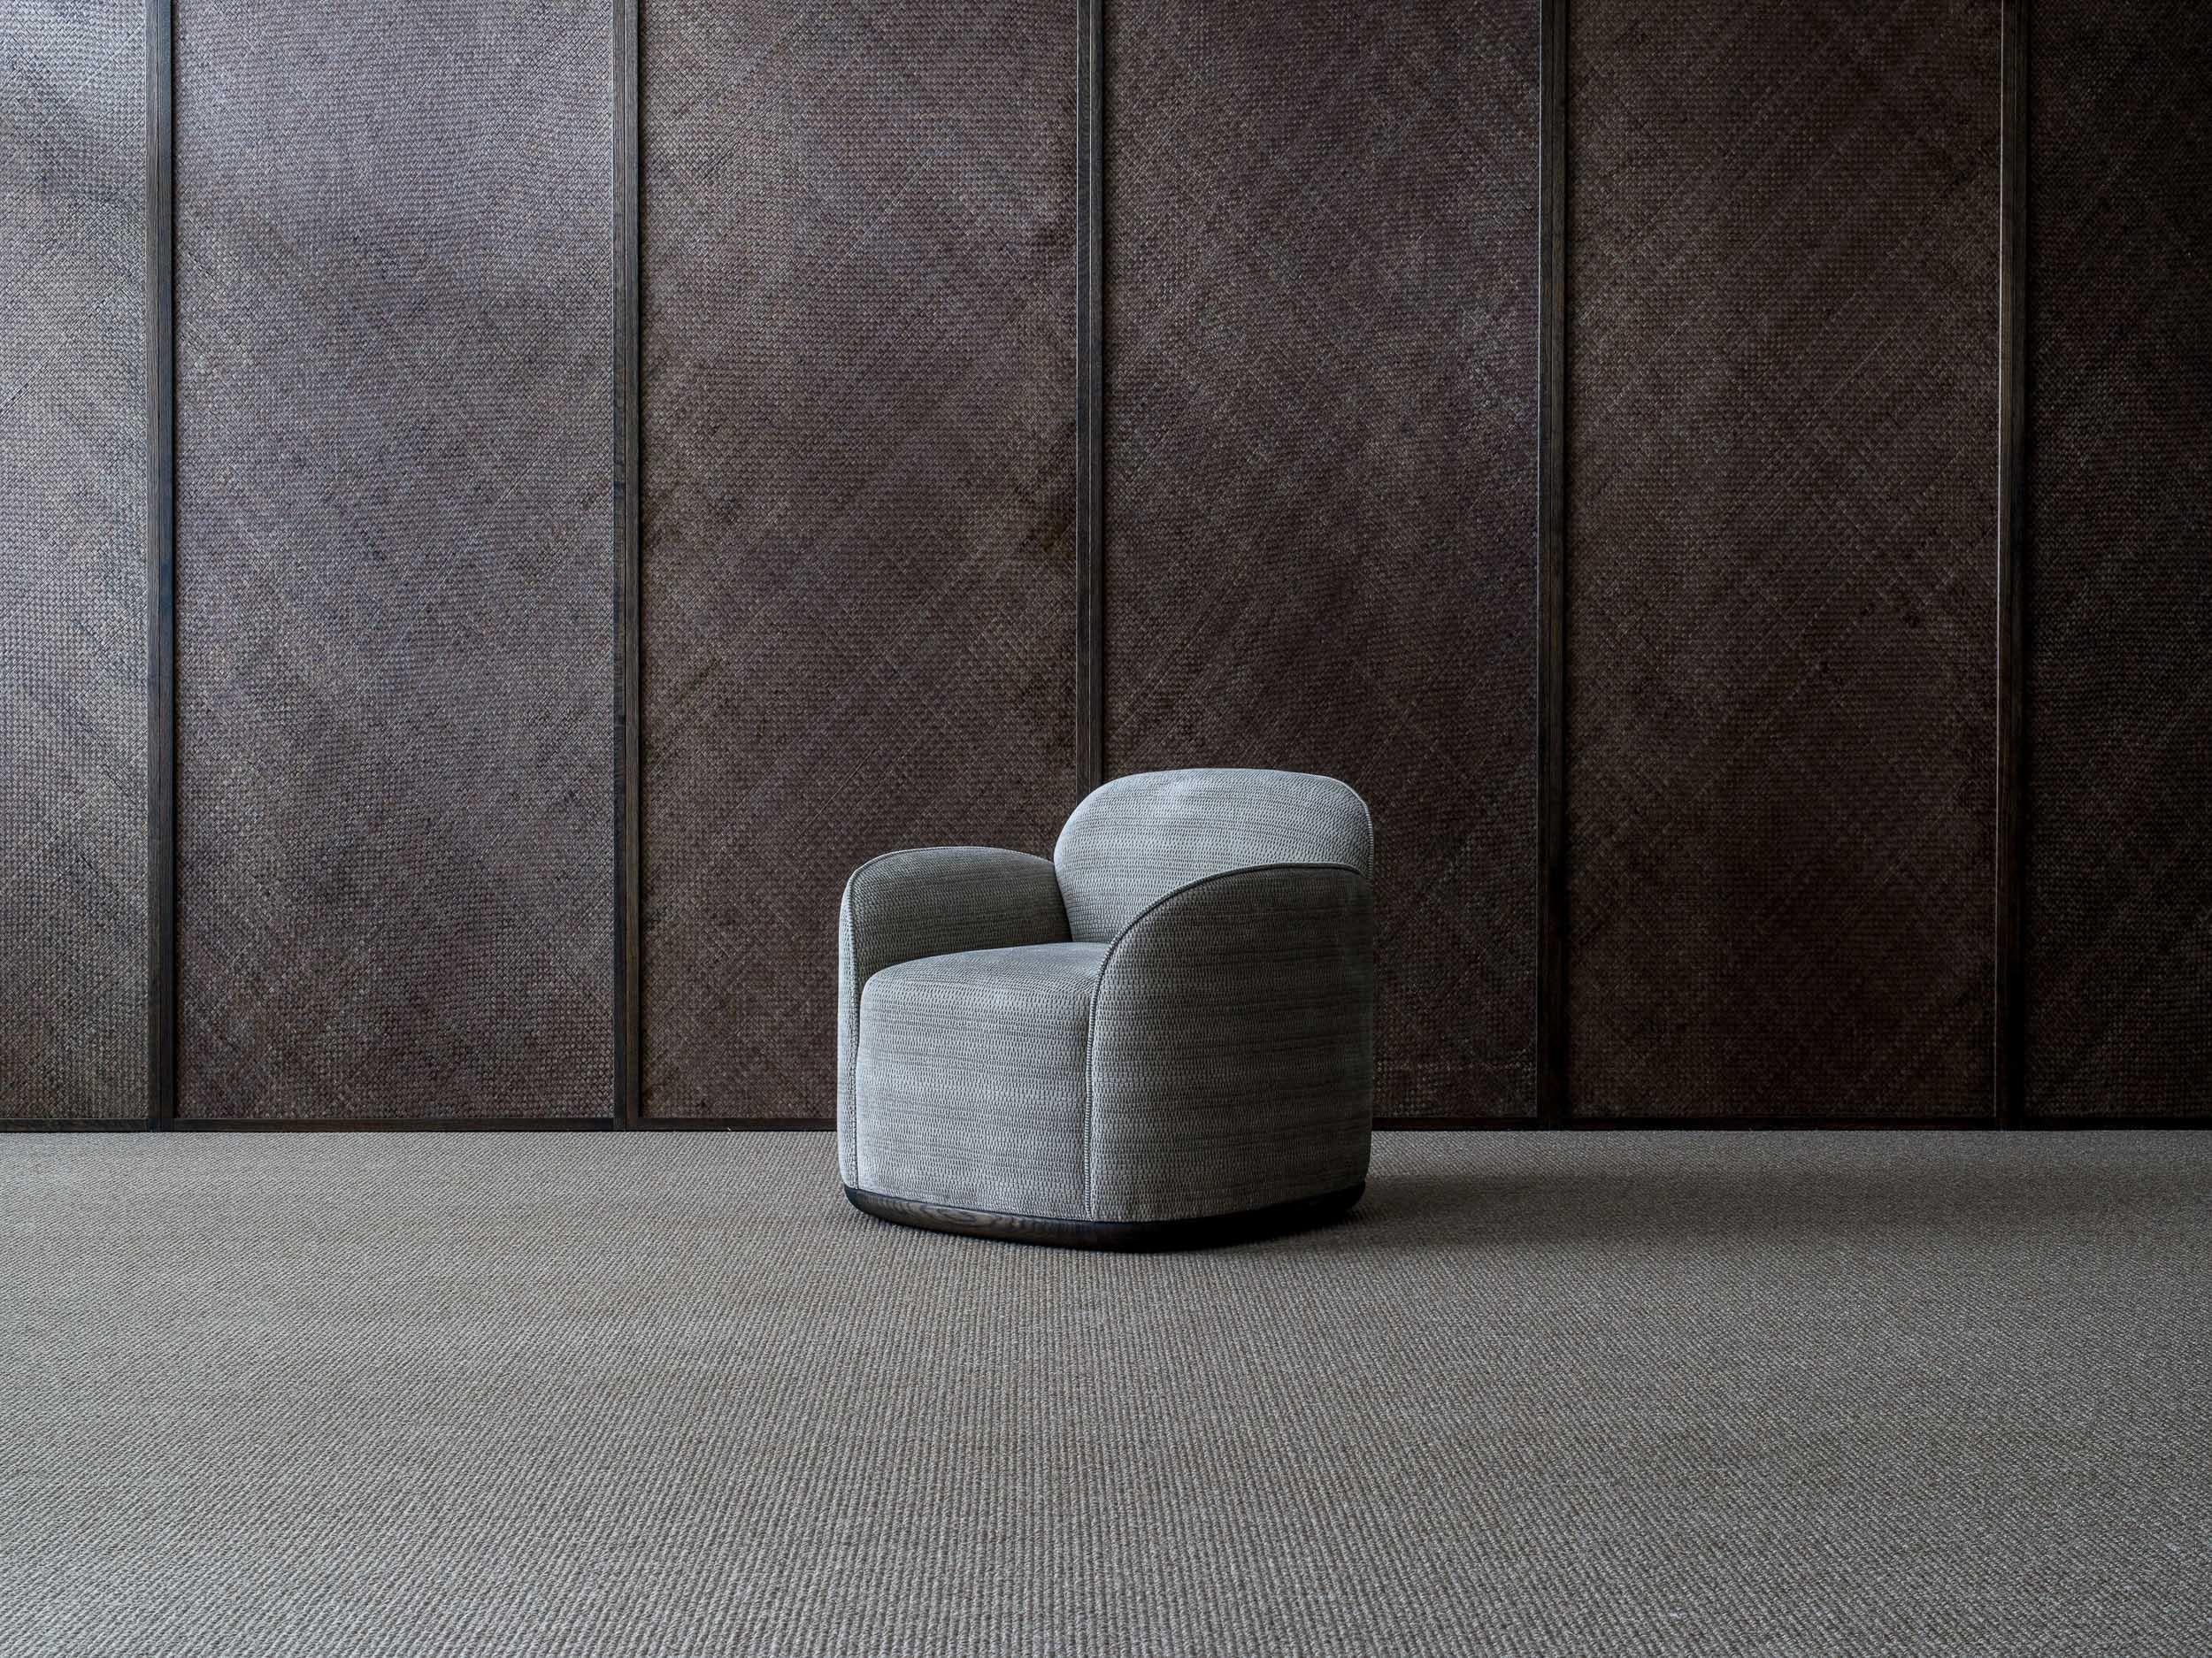 Unio armchair by Poiat 
Designers: Timo Mikkonen & Antti Rouhunkoski 

Collection UNIO 2021

Dimensions: H. 72 x W. 75 D. 72 SH. 40
Model shown: Cat 2. Larsen - Fox 02 
 
The Unio Collection, featuring an armchair and sofas, opens a new chapter for